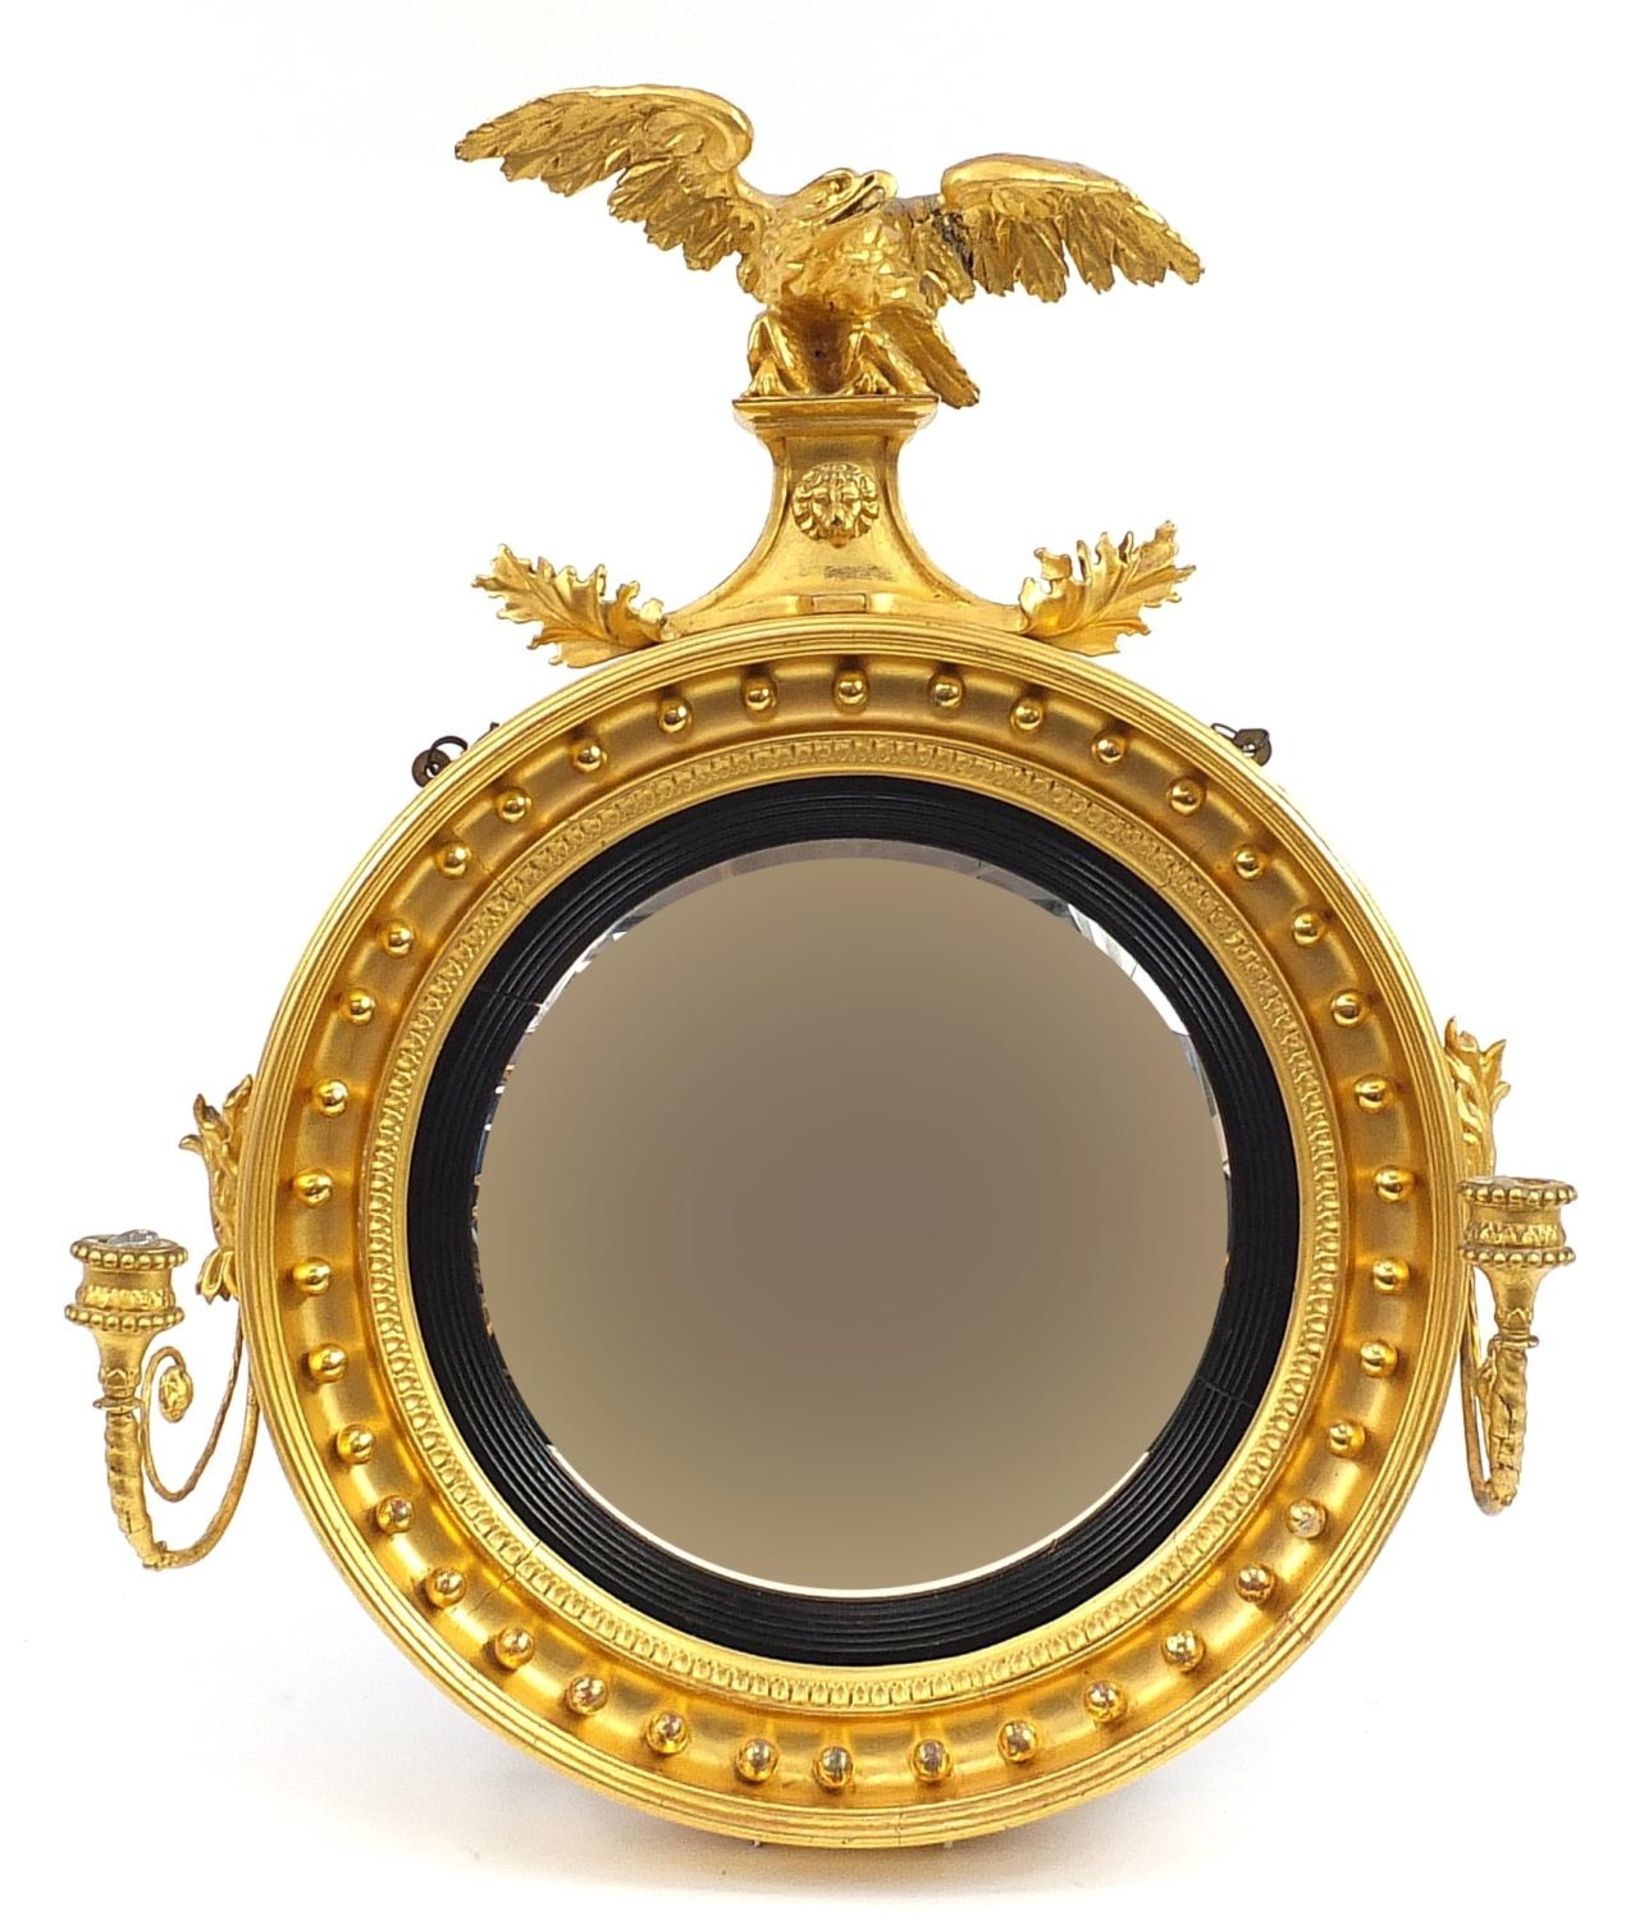 Regency giltwood convex wall mirror with sconces and eagle crest, 75cm high